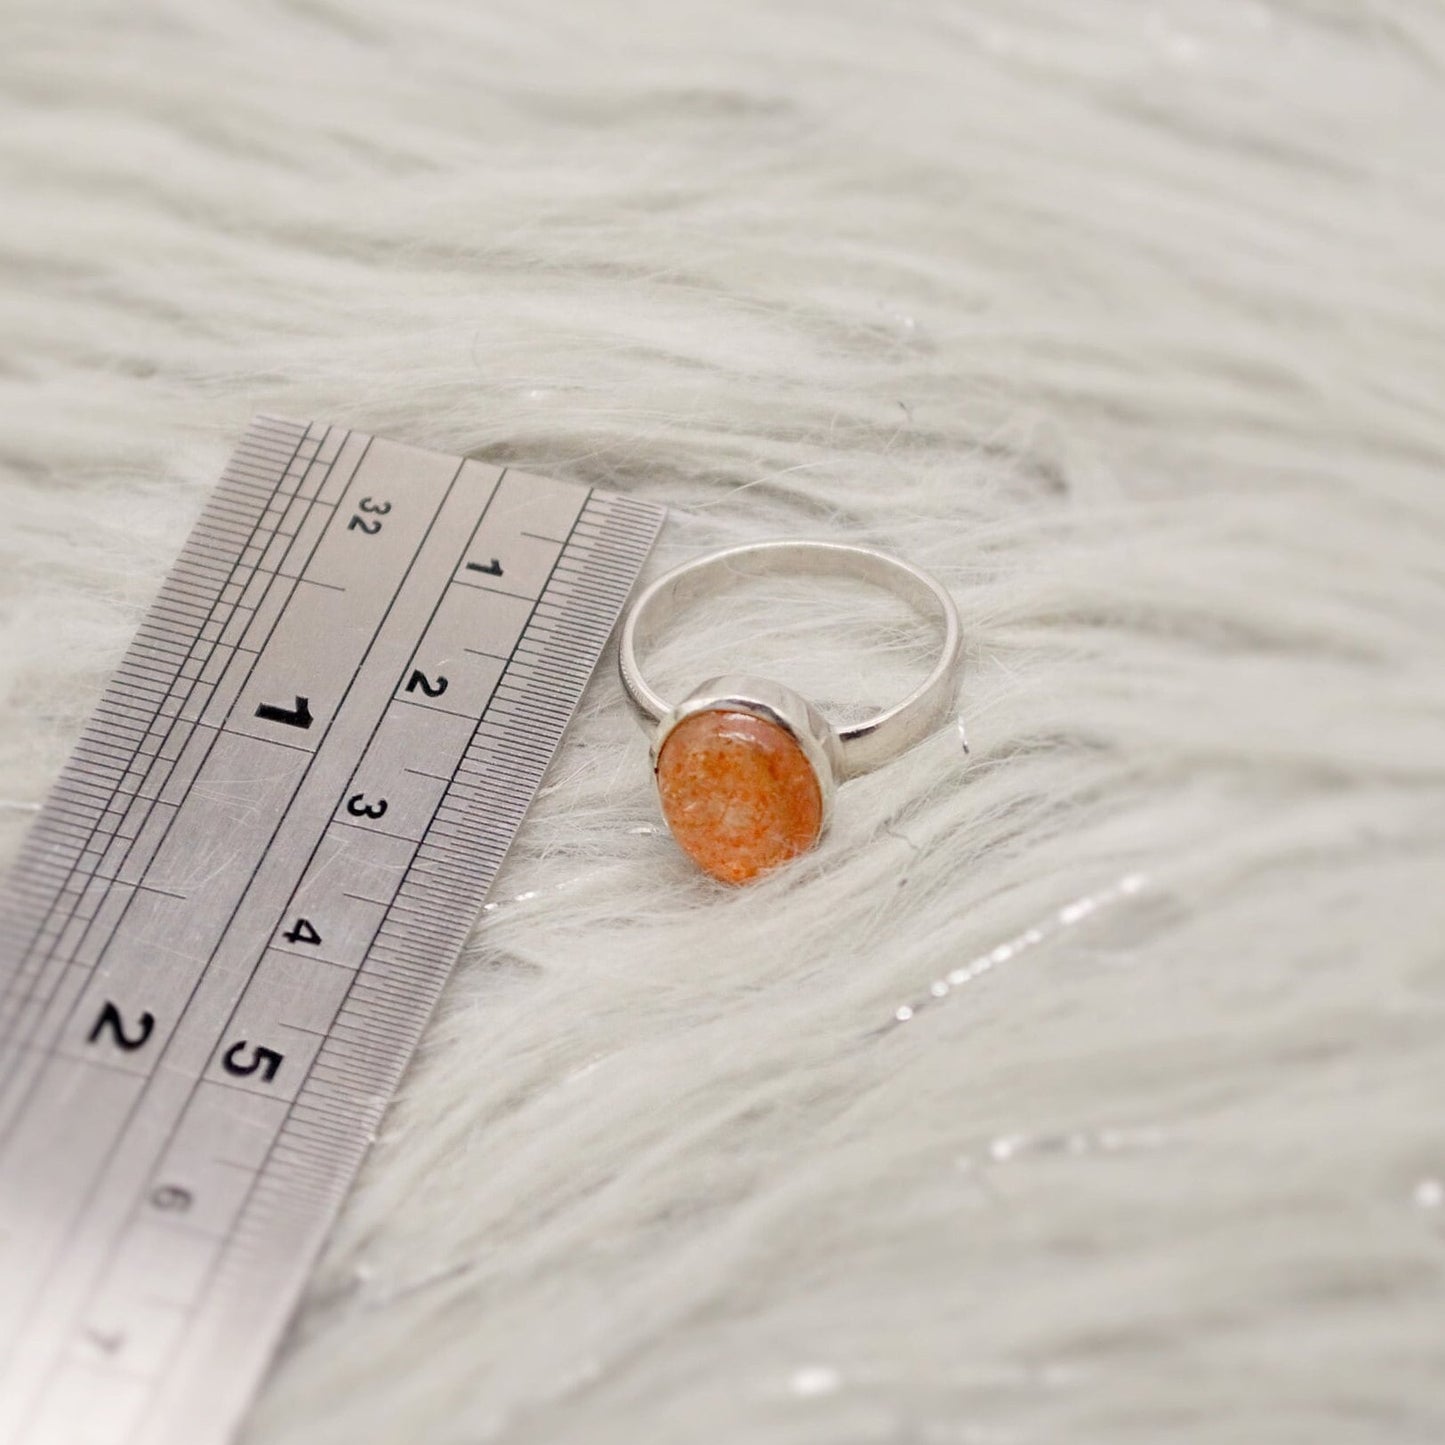 Sunstone Sterling Silver Ring, Orange Gemstone Ring, Rings For Women, Sunstone Jewelry, Birthday Gift For Her, Mothers Day Gift, Anniversary